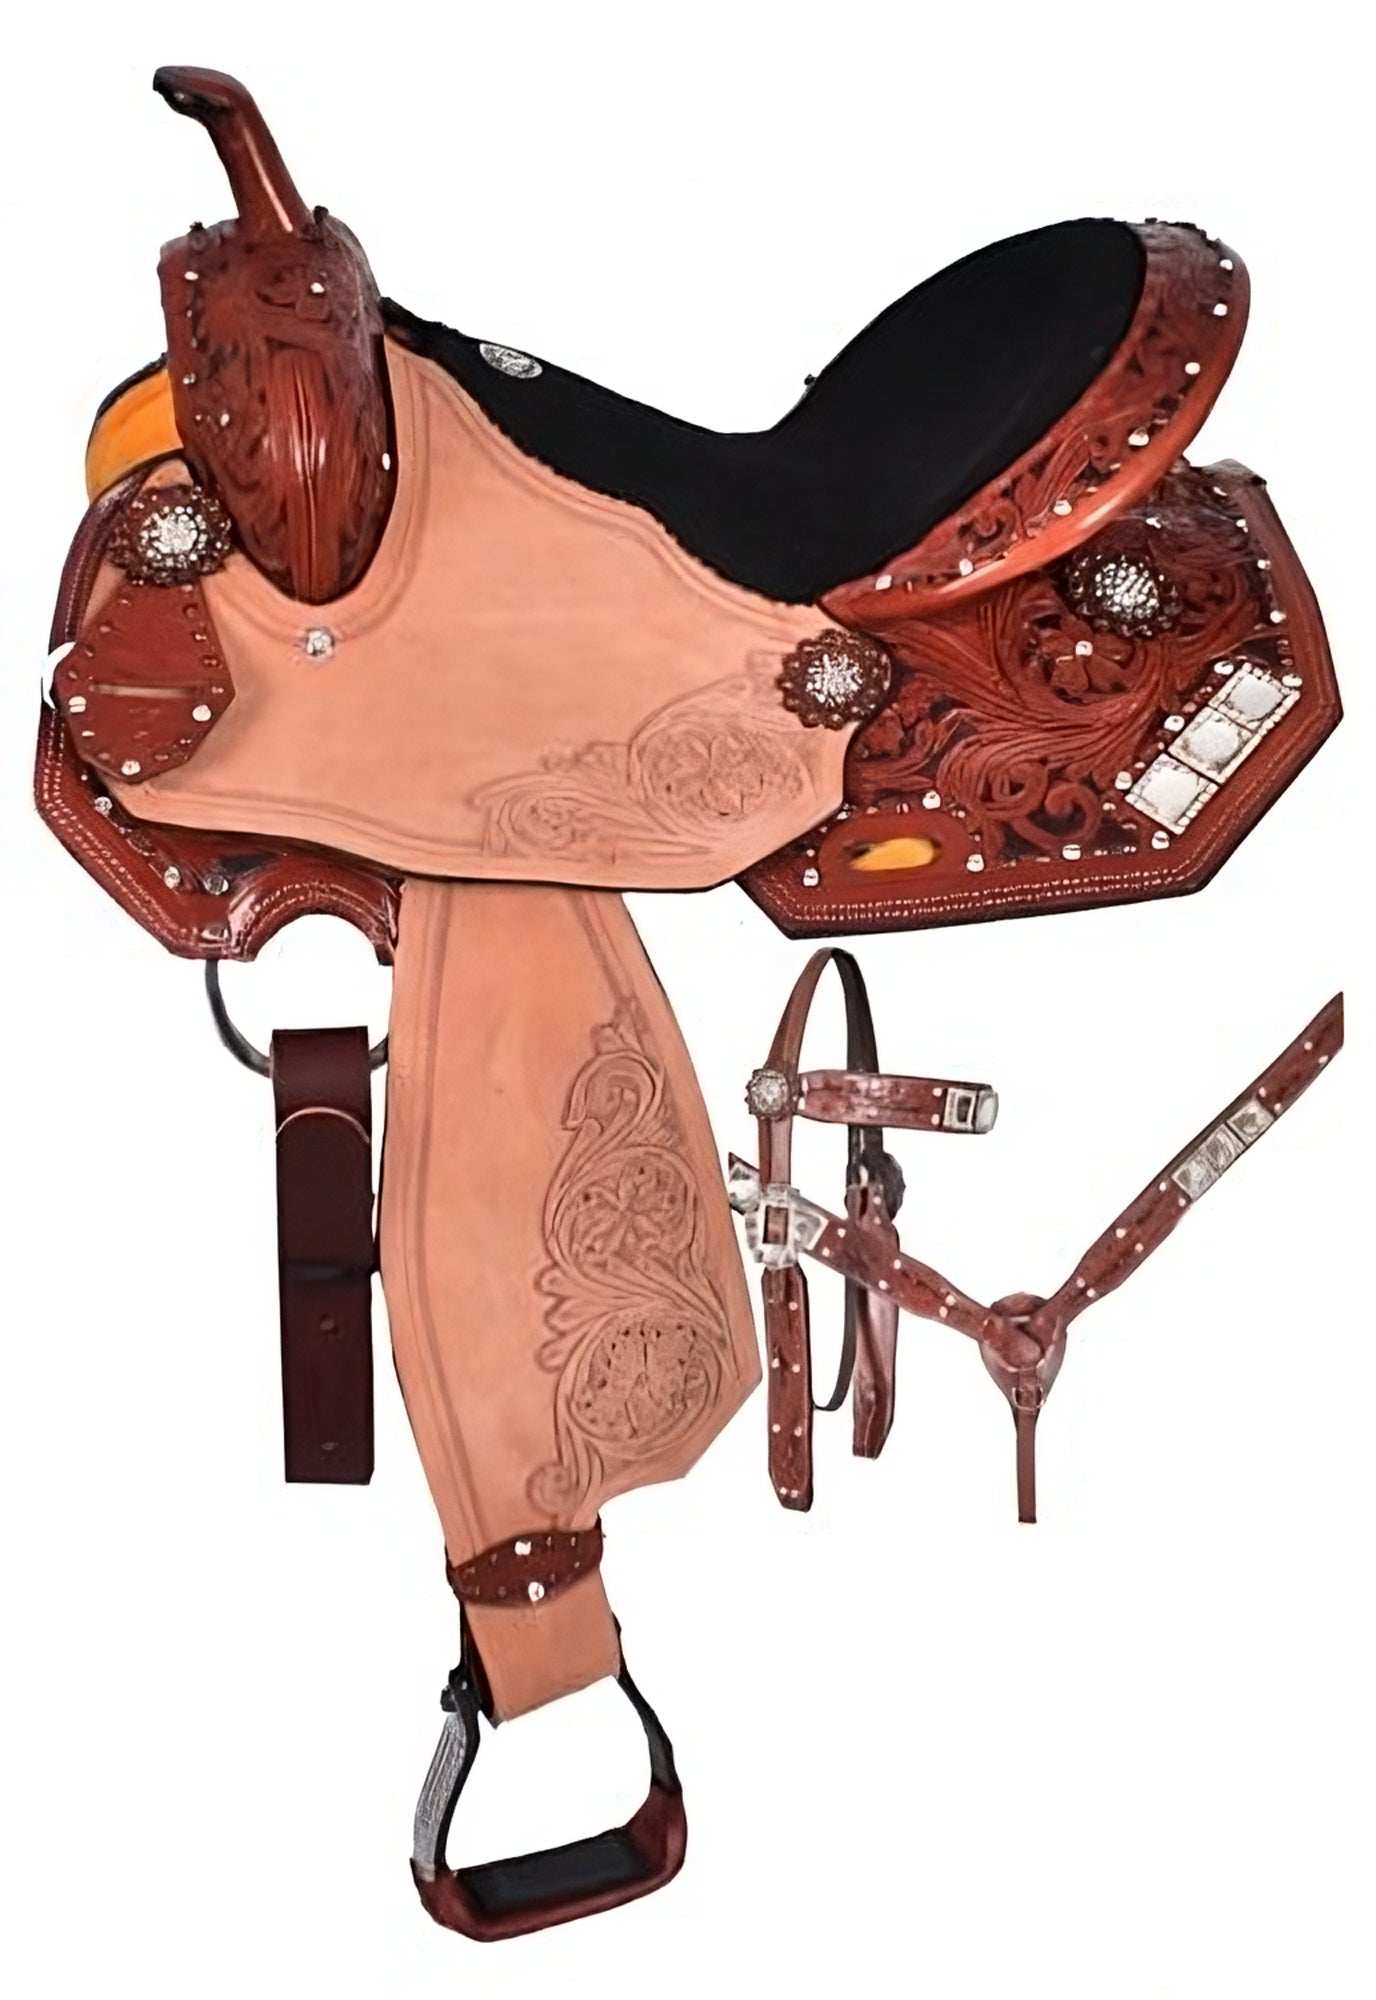 013: 14", 15" Double T Barrel Saddle Set with floral tooling Barrel Saddle Double T   